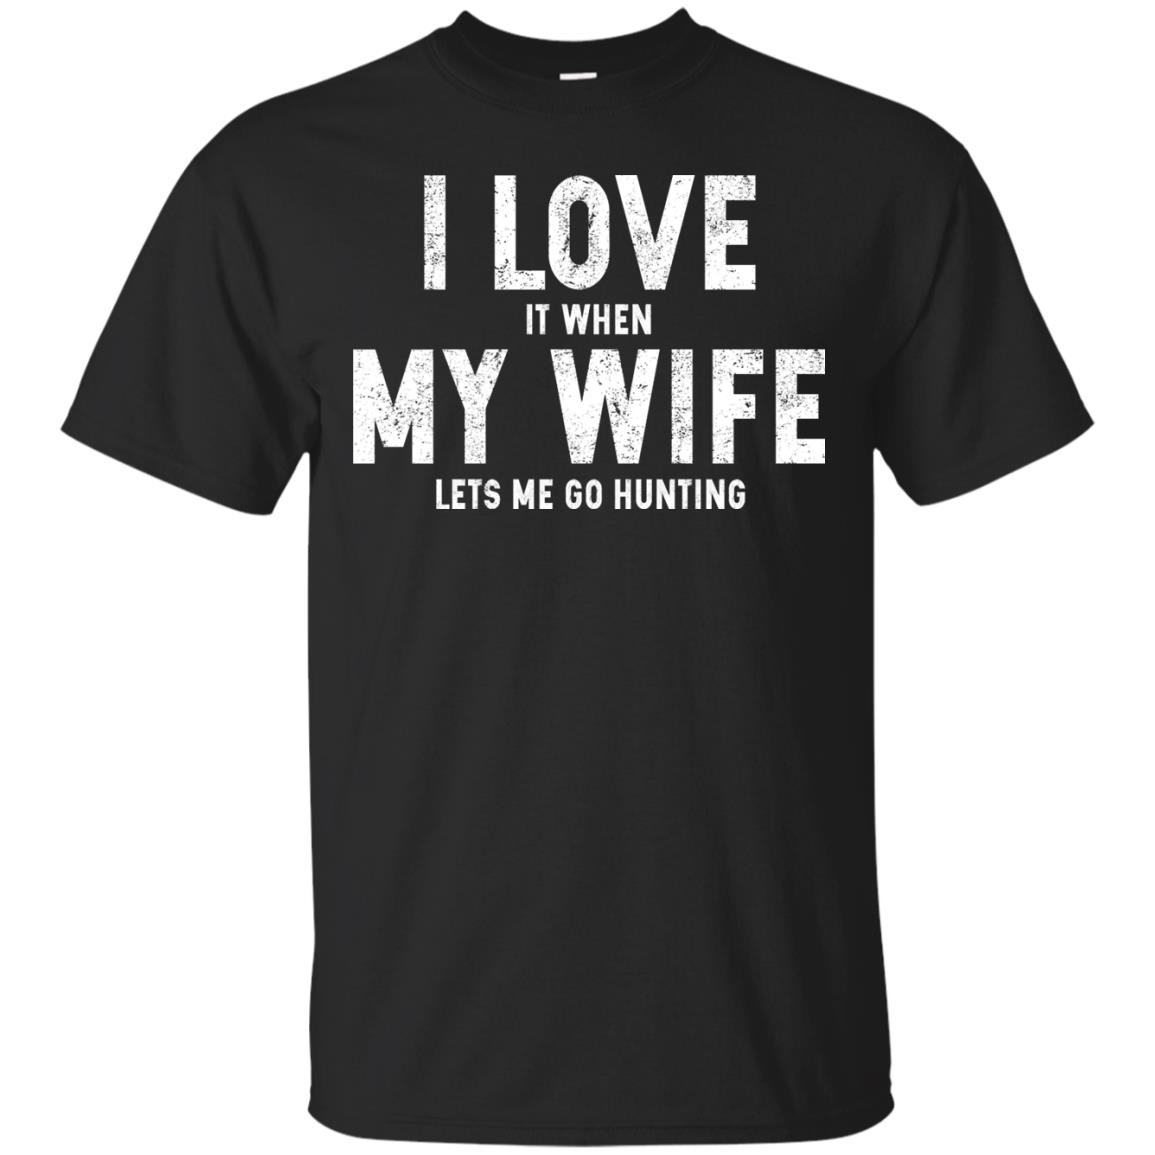 I Love It When My Wife Lets Me Go Hunting Shirt | Allbluetees.com